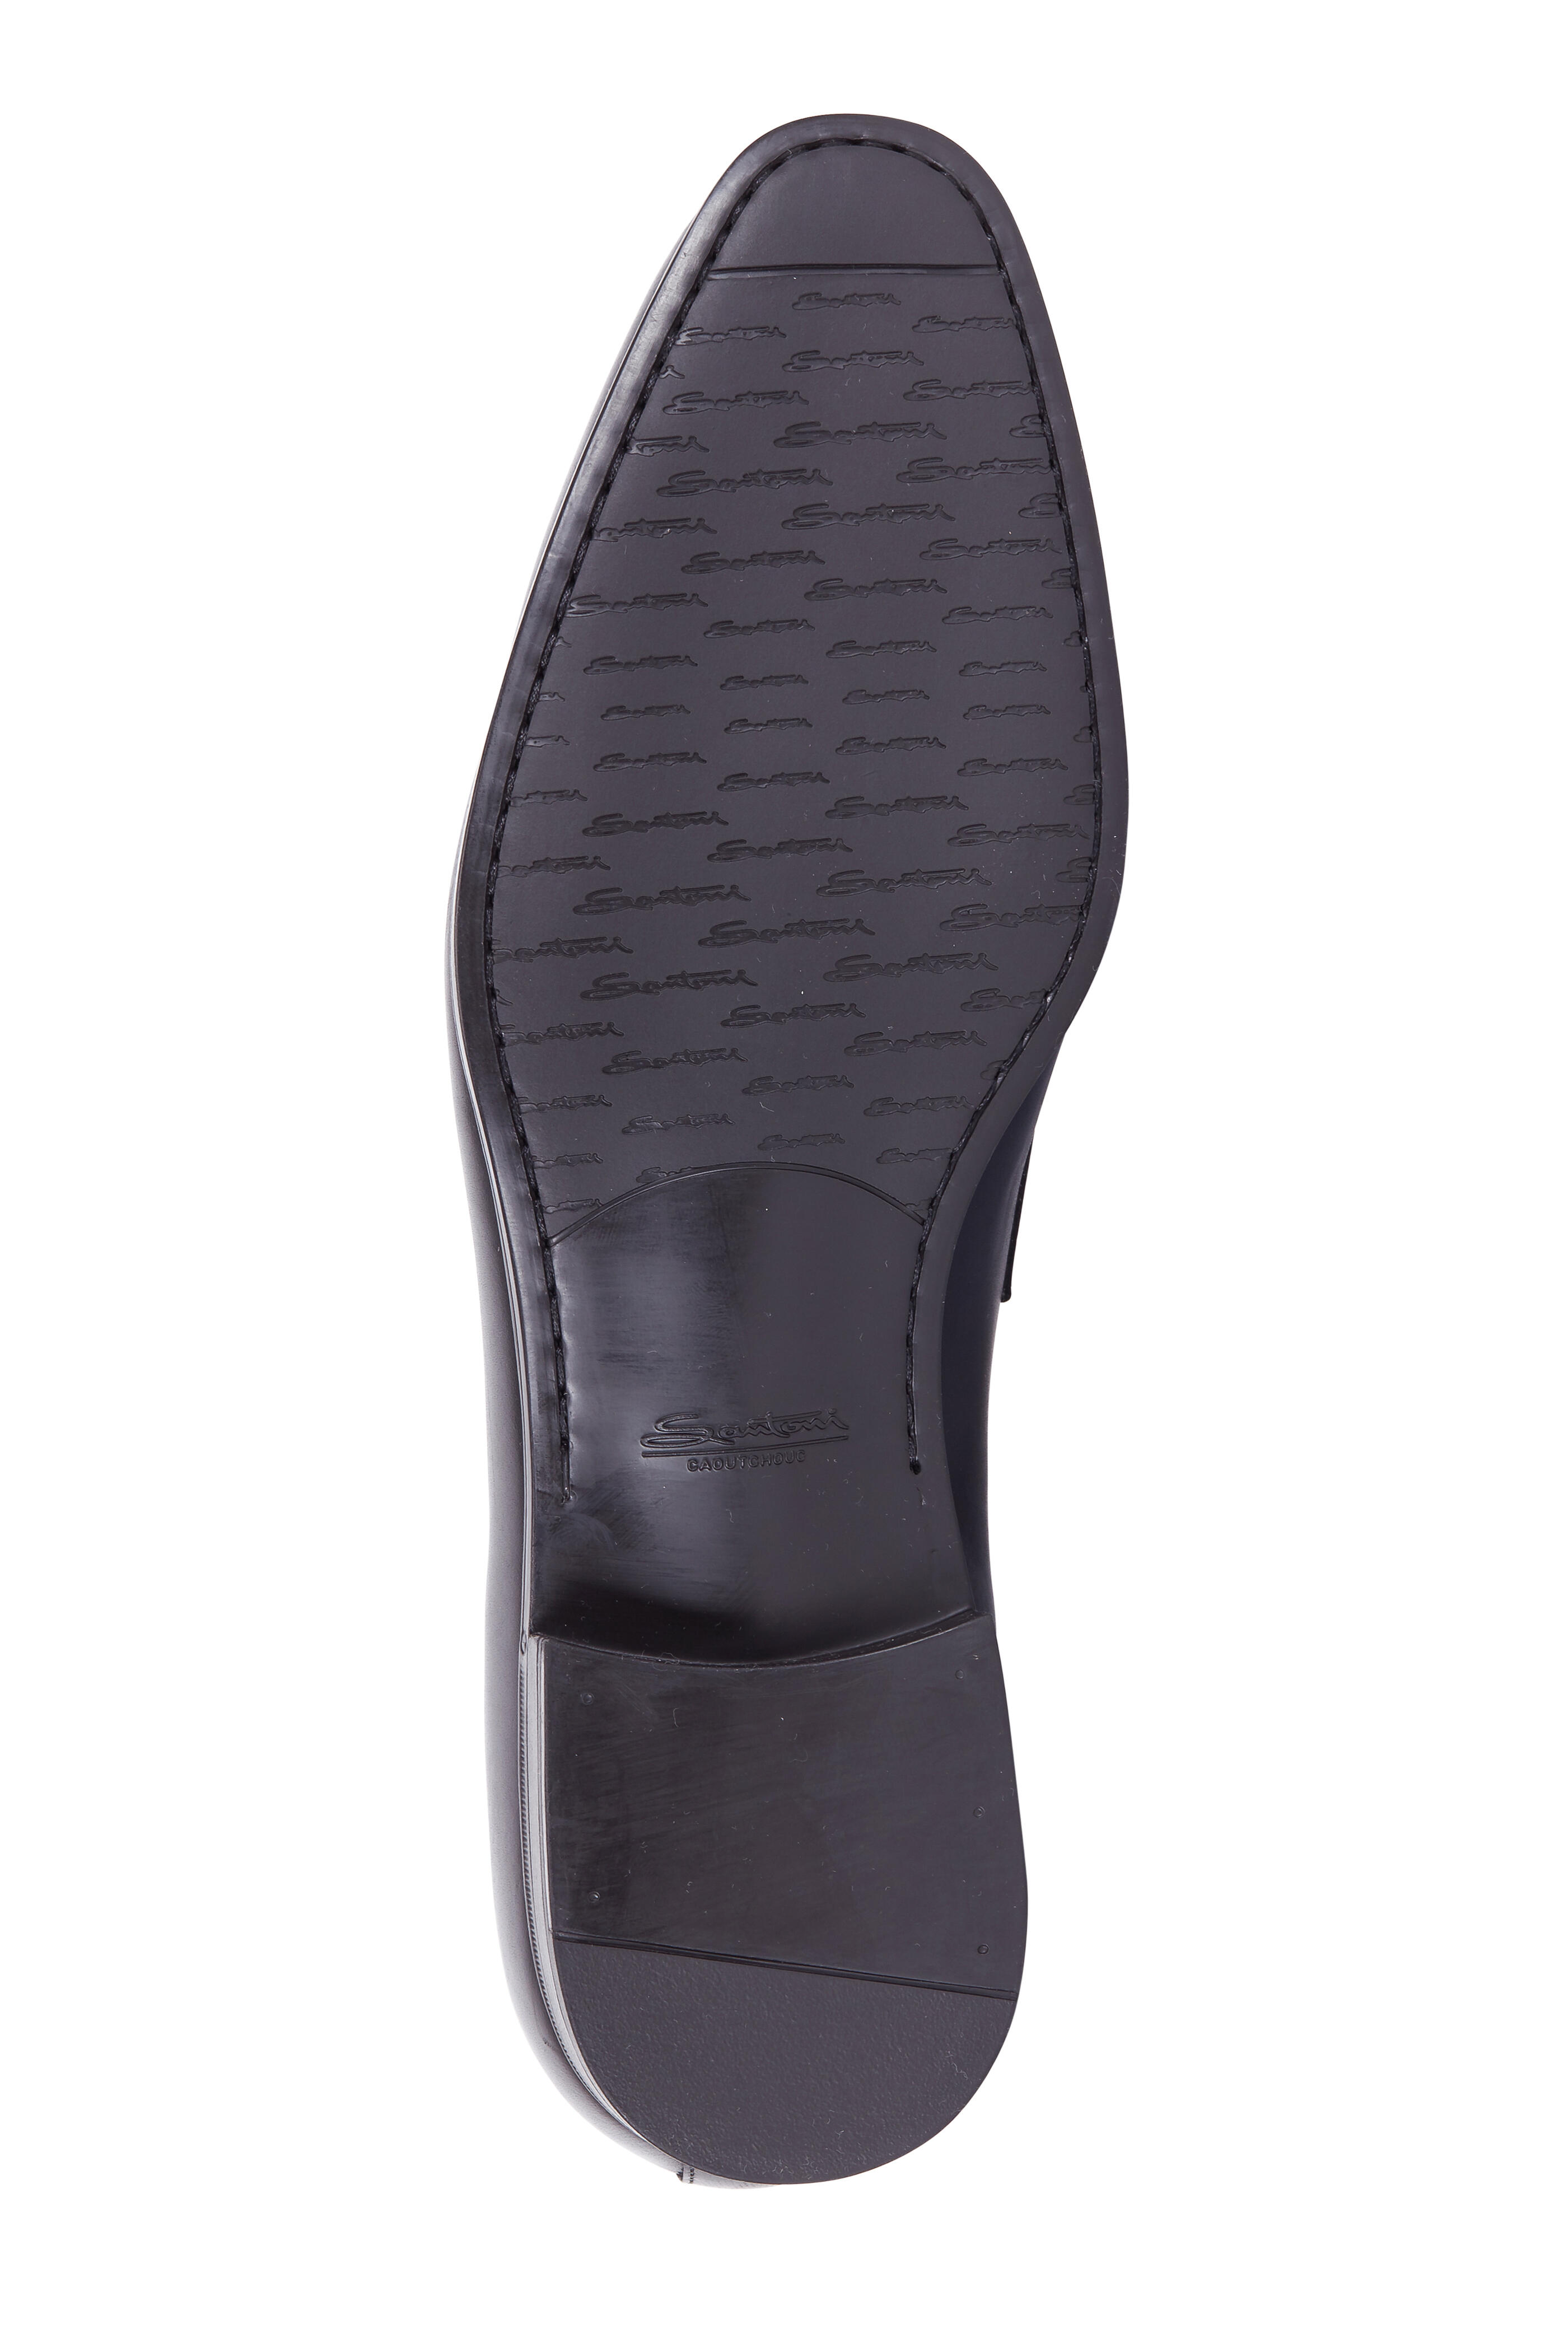 Santoni - Gavin Black Leather Penny Loafer | Mitchell Stores